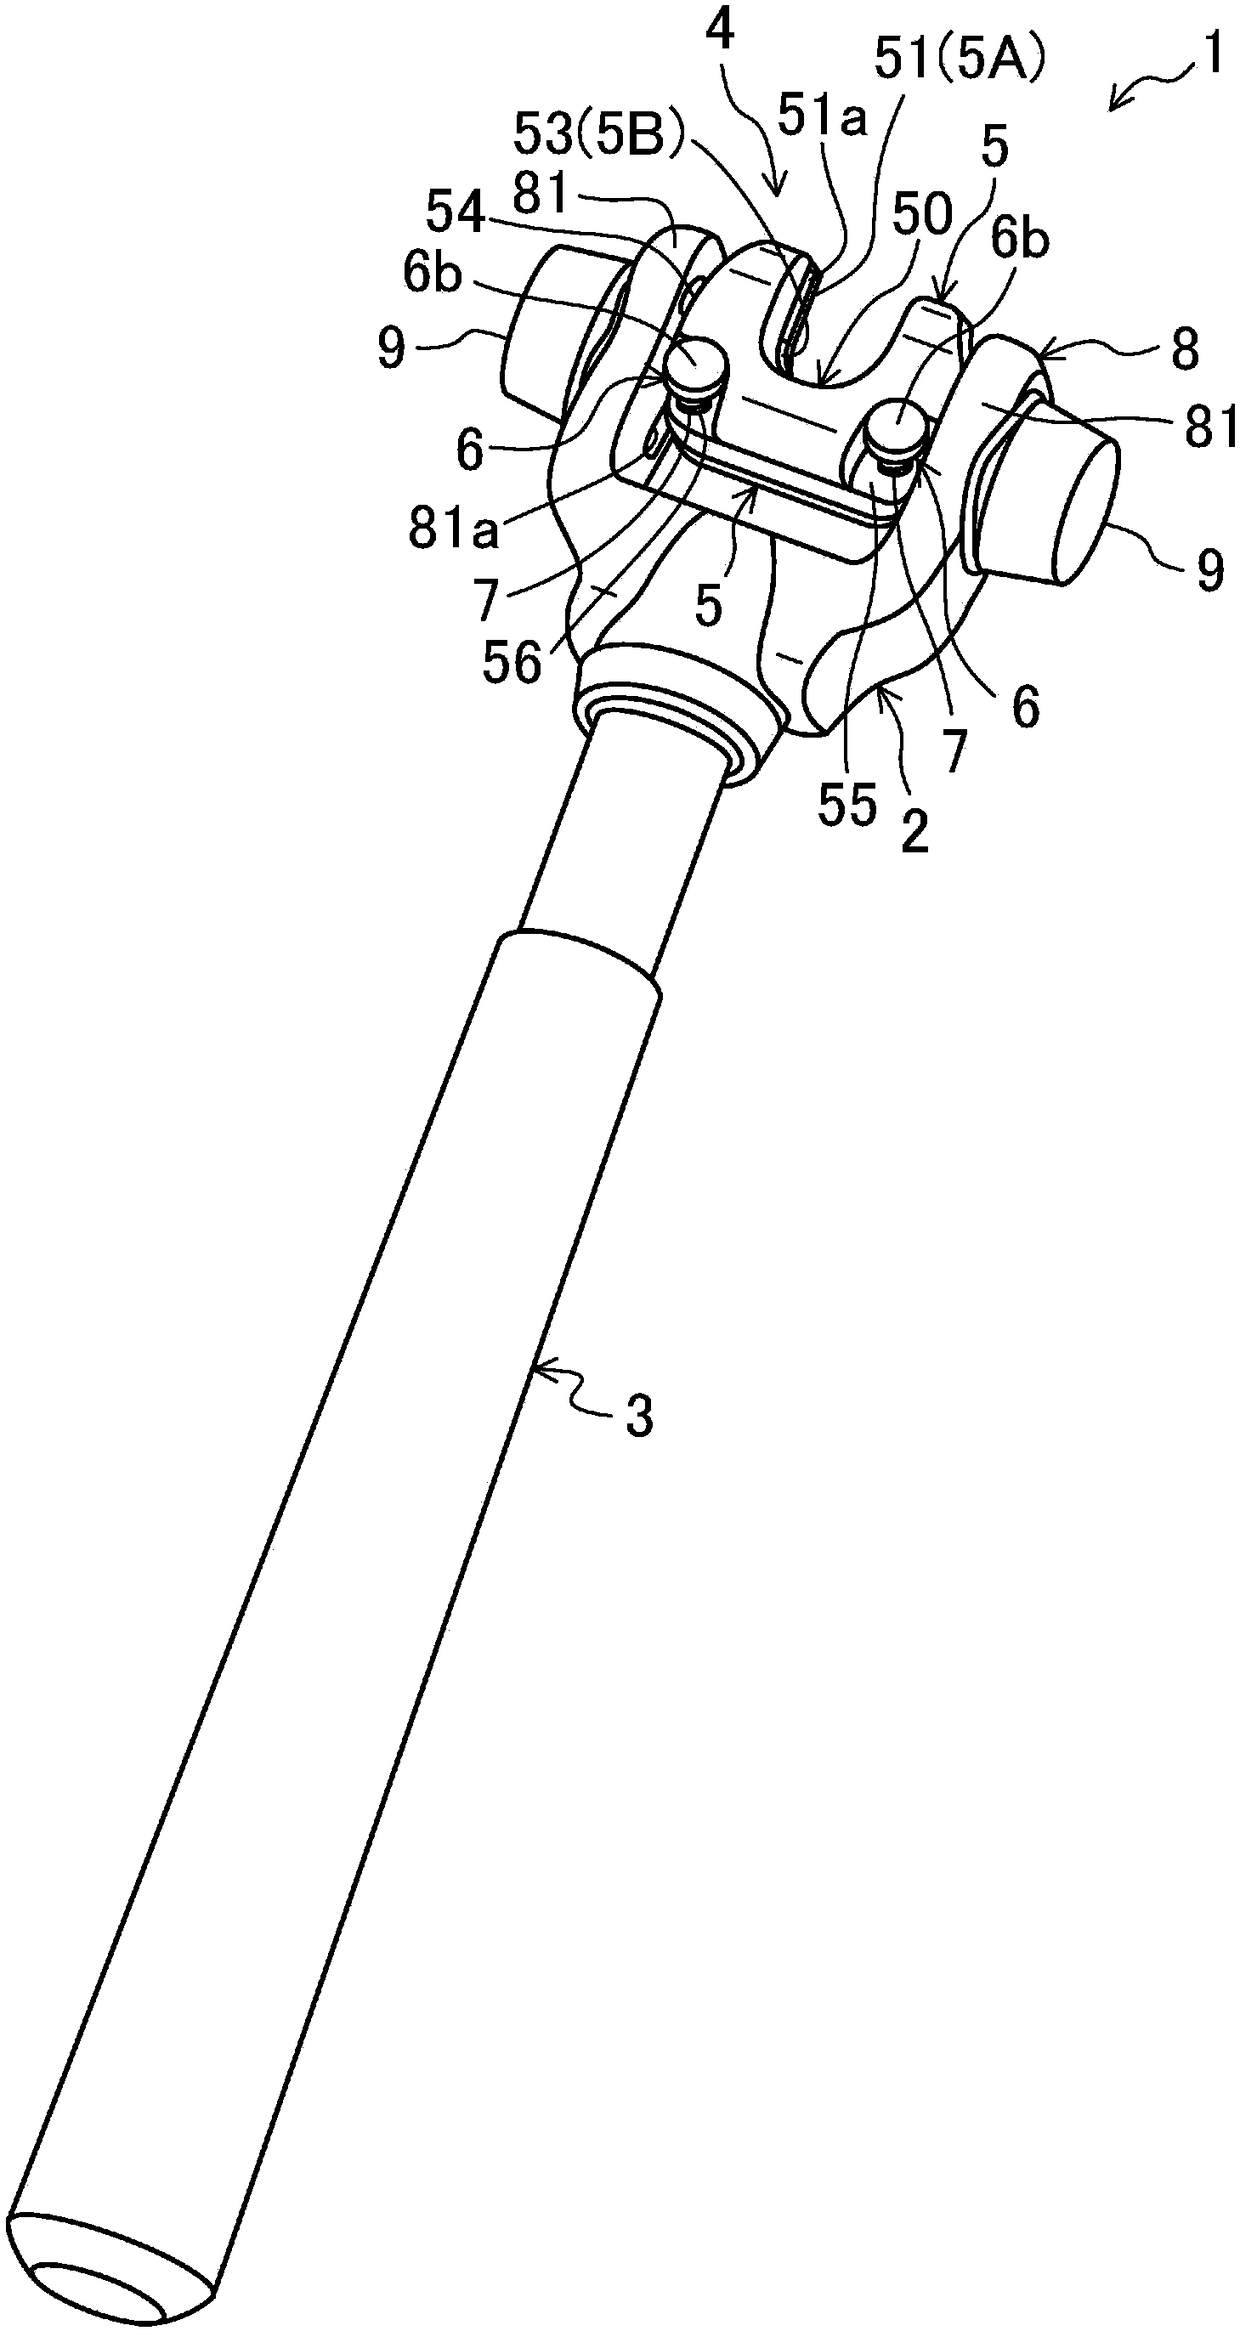 Electrode pad removal device and hammer